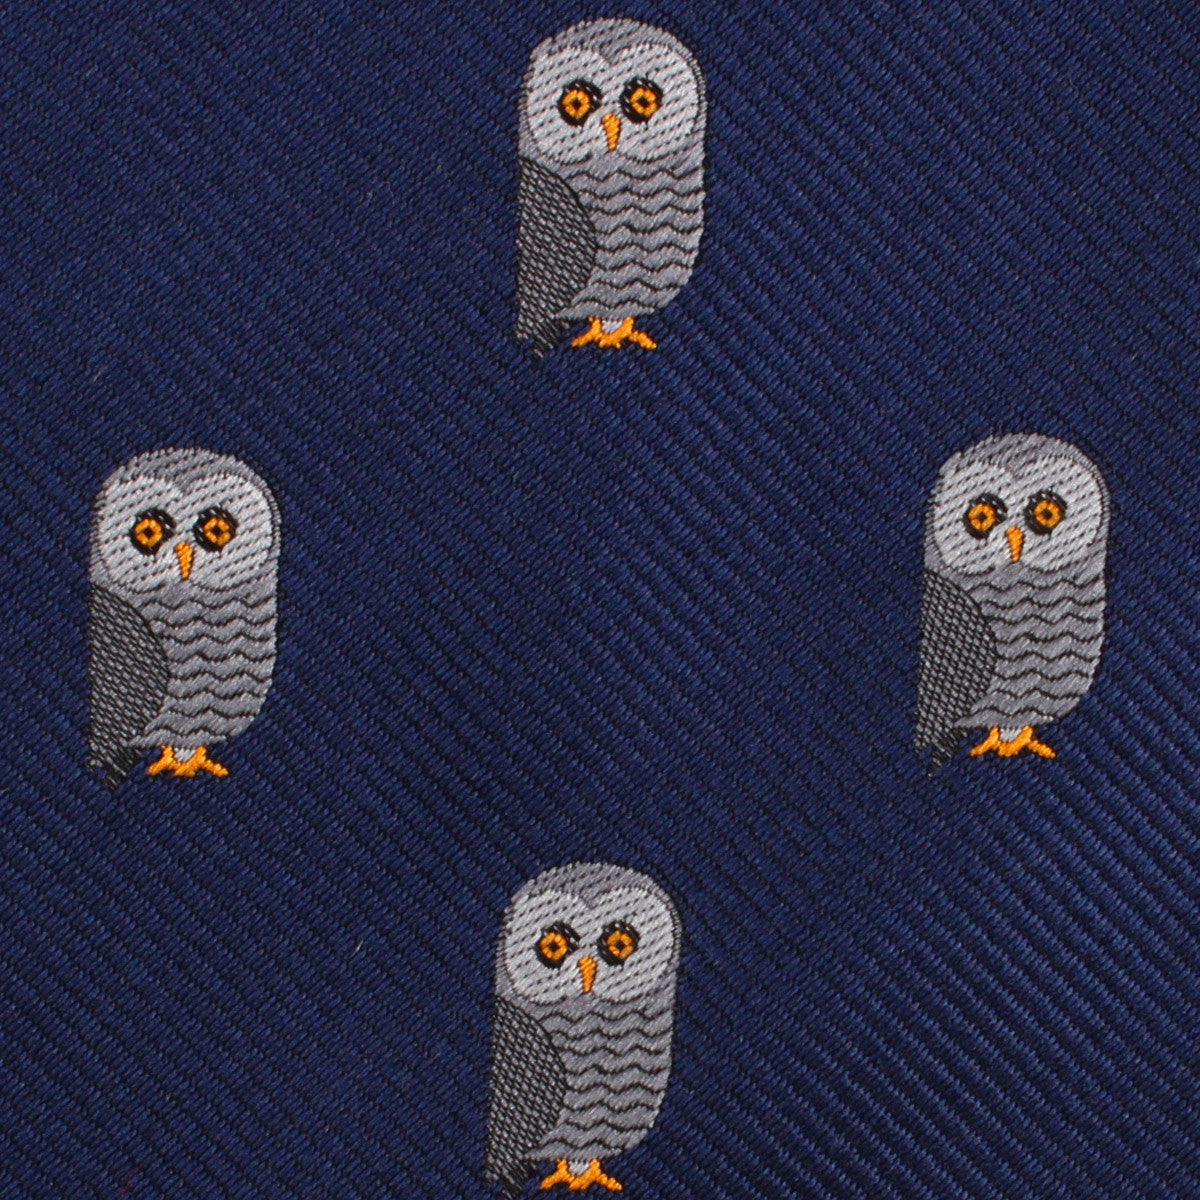 Southern Grey Owl Fabric Pocket Square